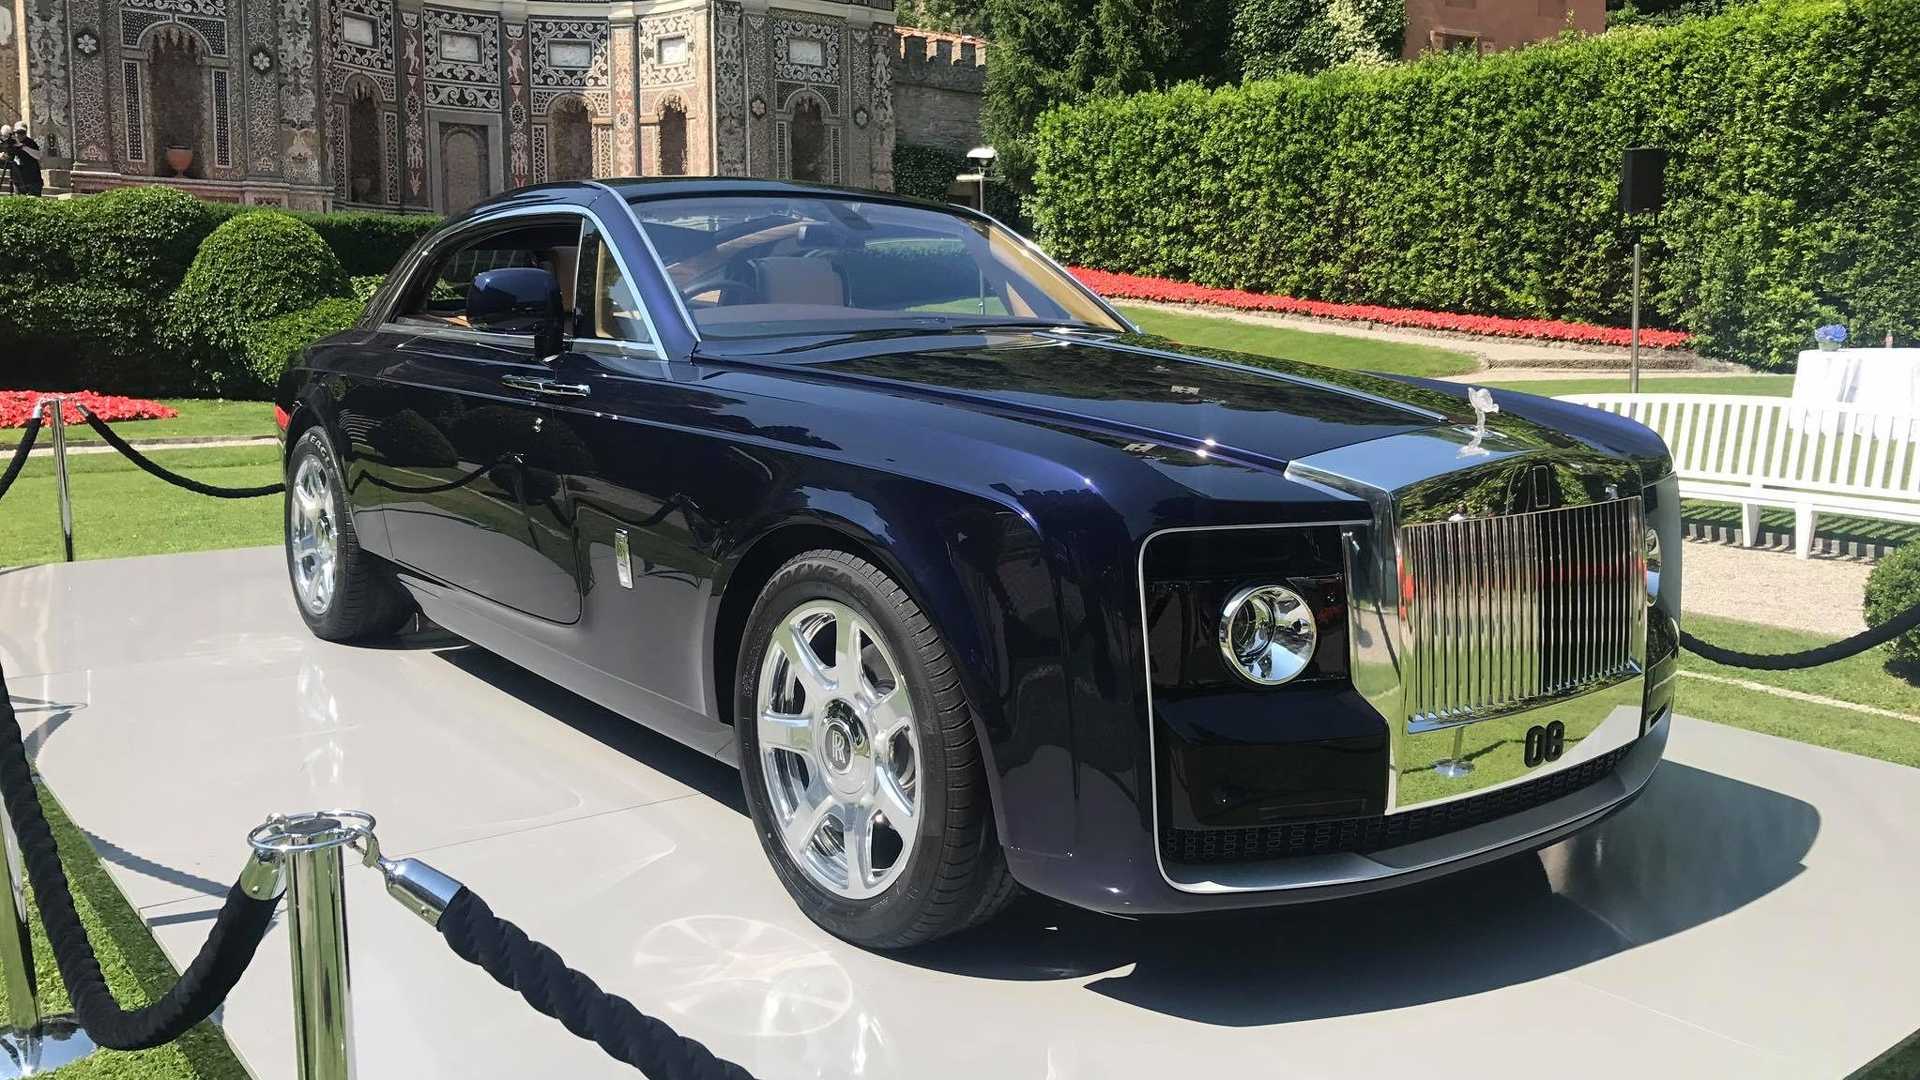 Rolls Royce Says Sweptail Likely The Most Expensive New Car Ever